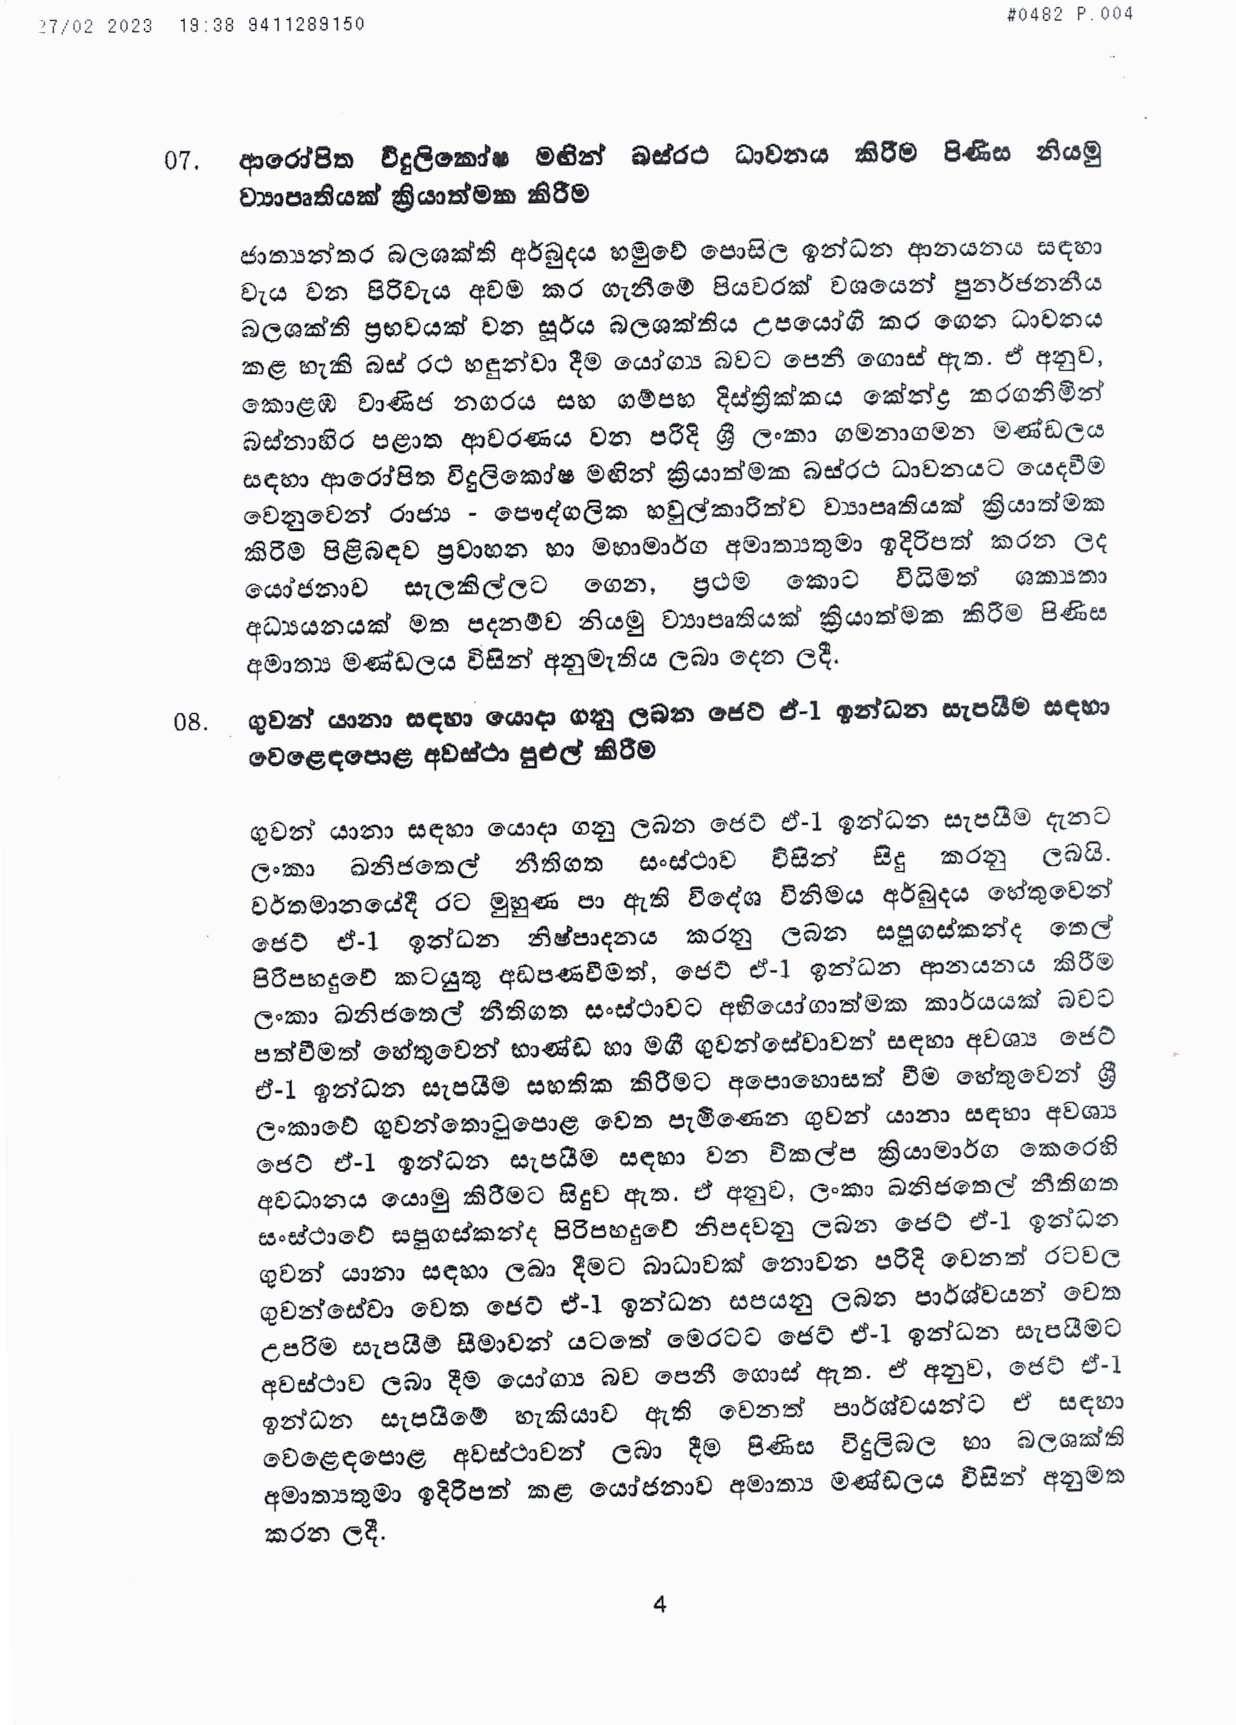 Cabinet Decision on 27.07.2023 1 page 004